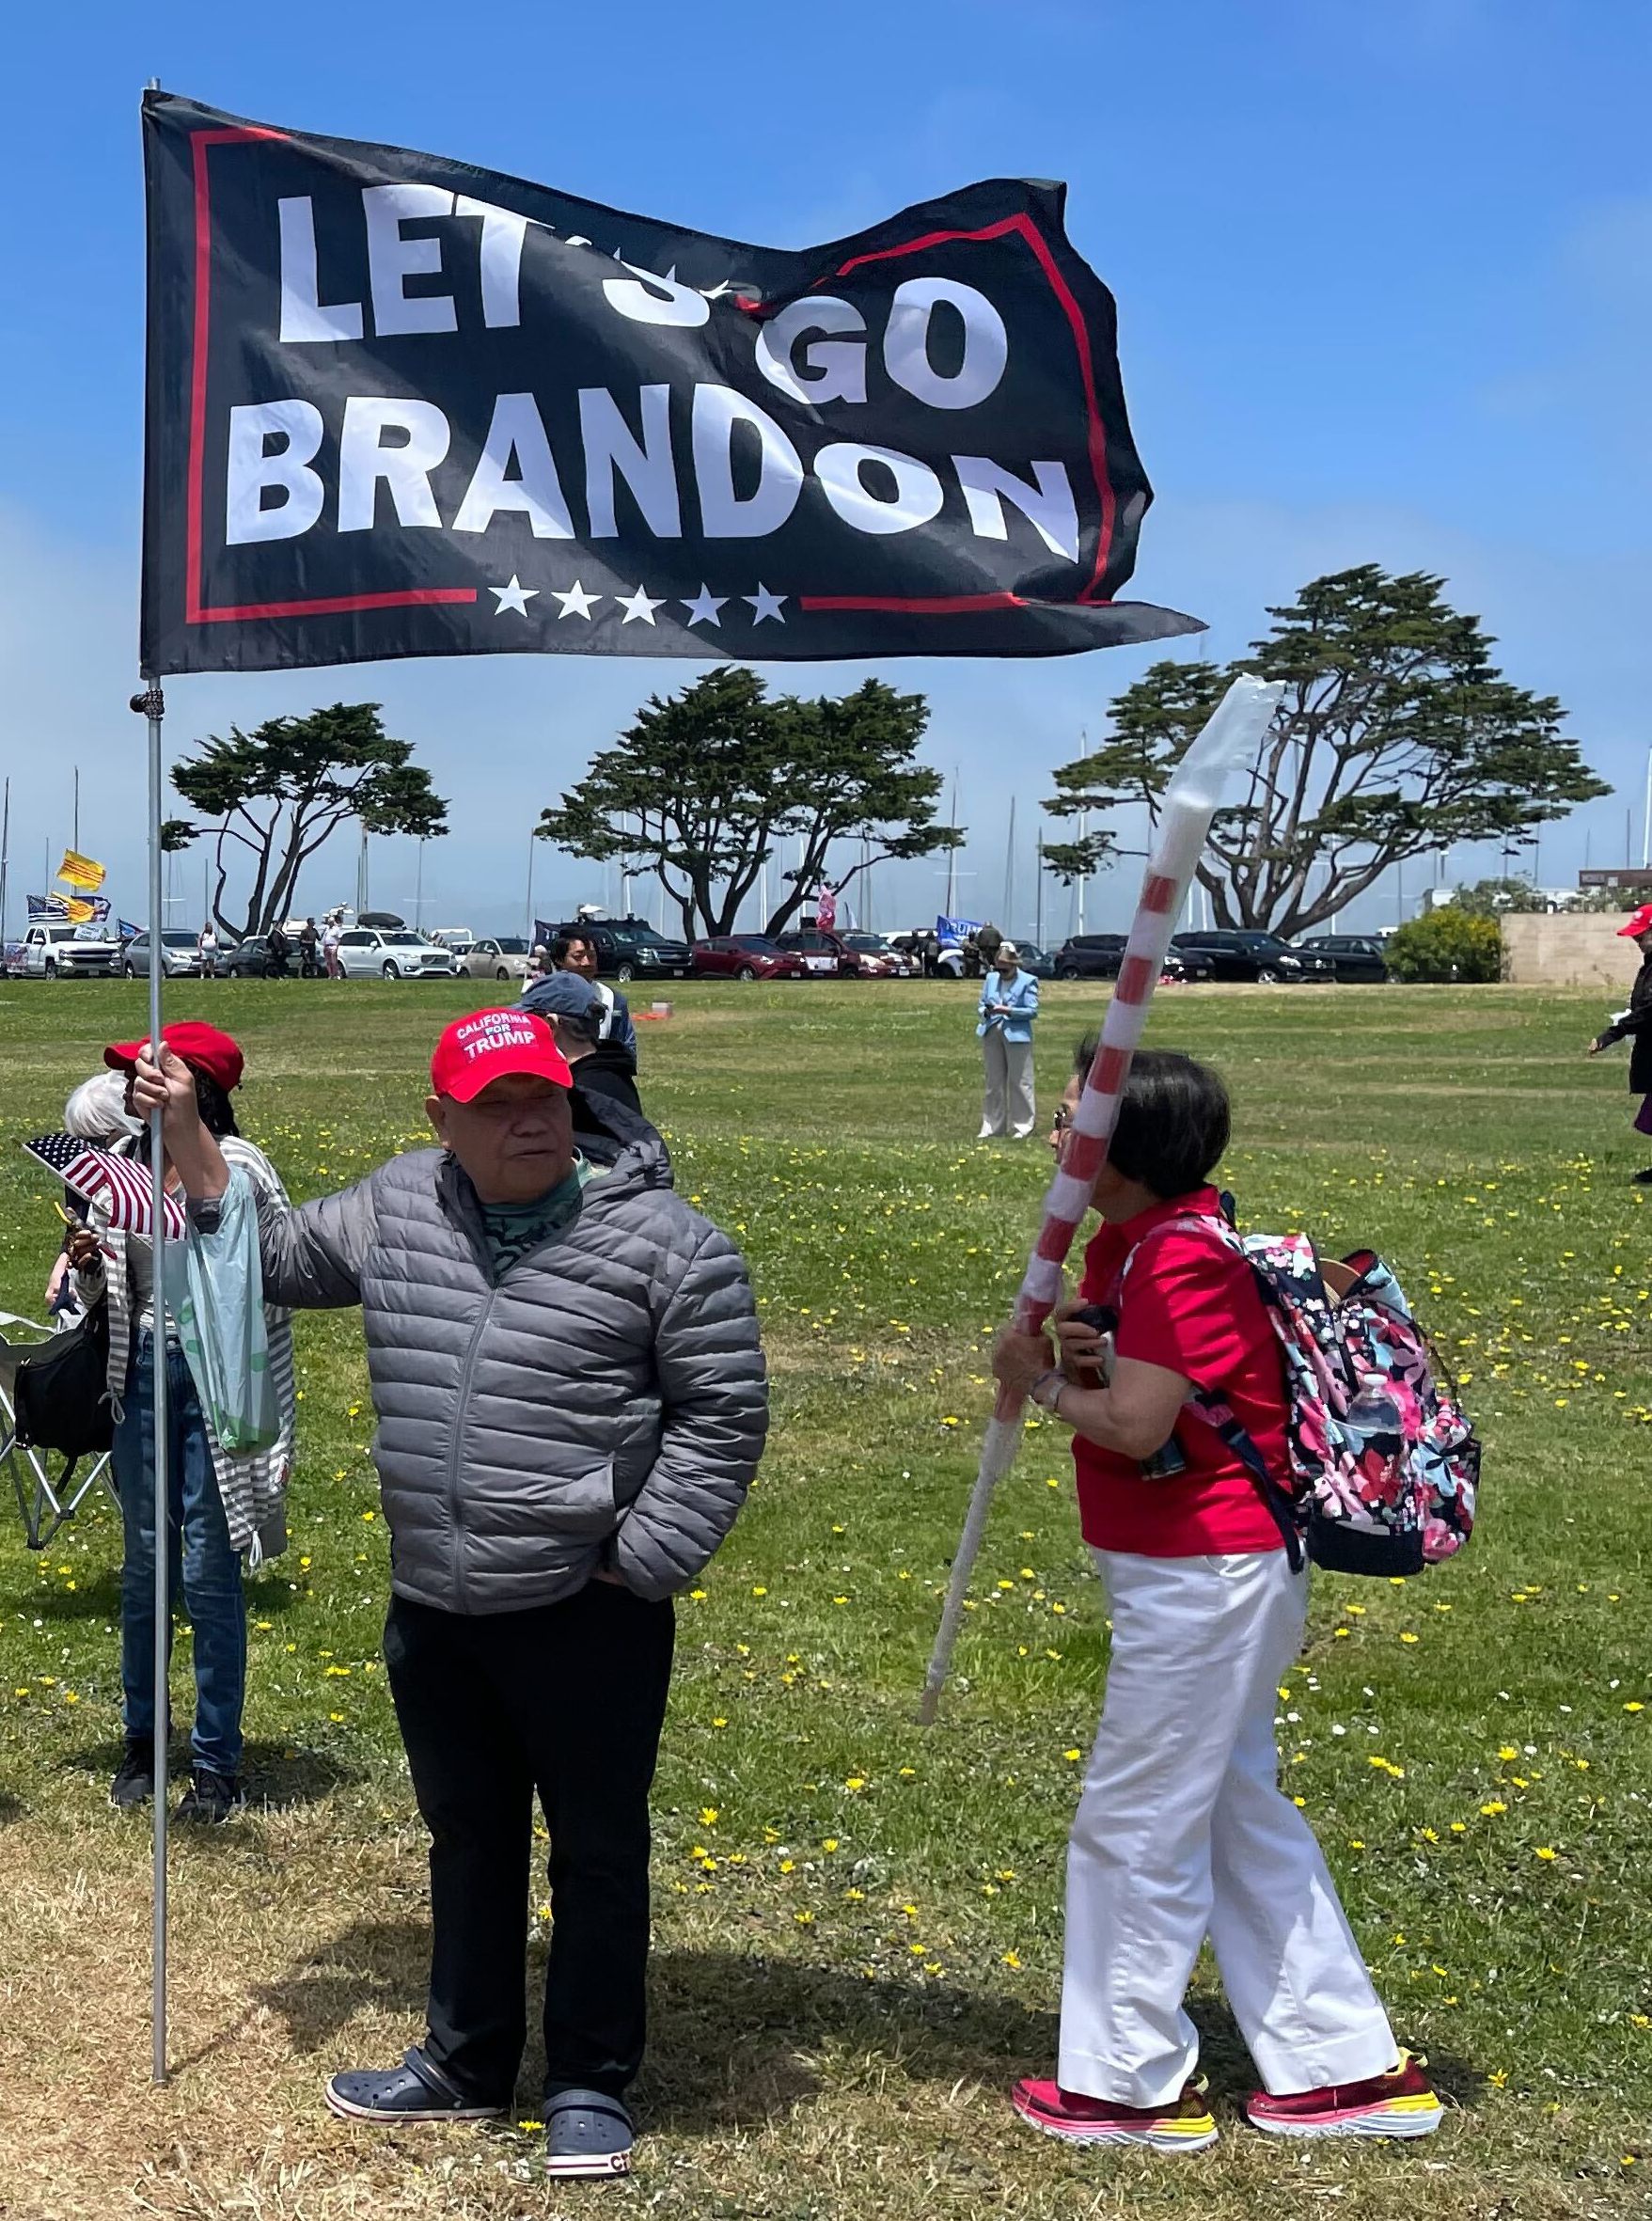 A man in a gray jacket and red hat holds a flag stating &quot;LET'S GO BRANDON&quot; on a grassy field. A woman in red with a colorful backpack stands nearby. Trees and cars are in the background.